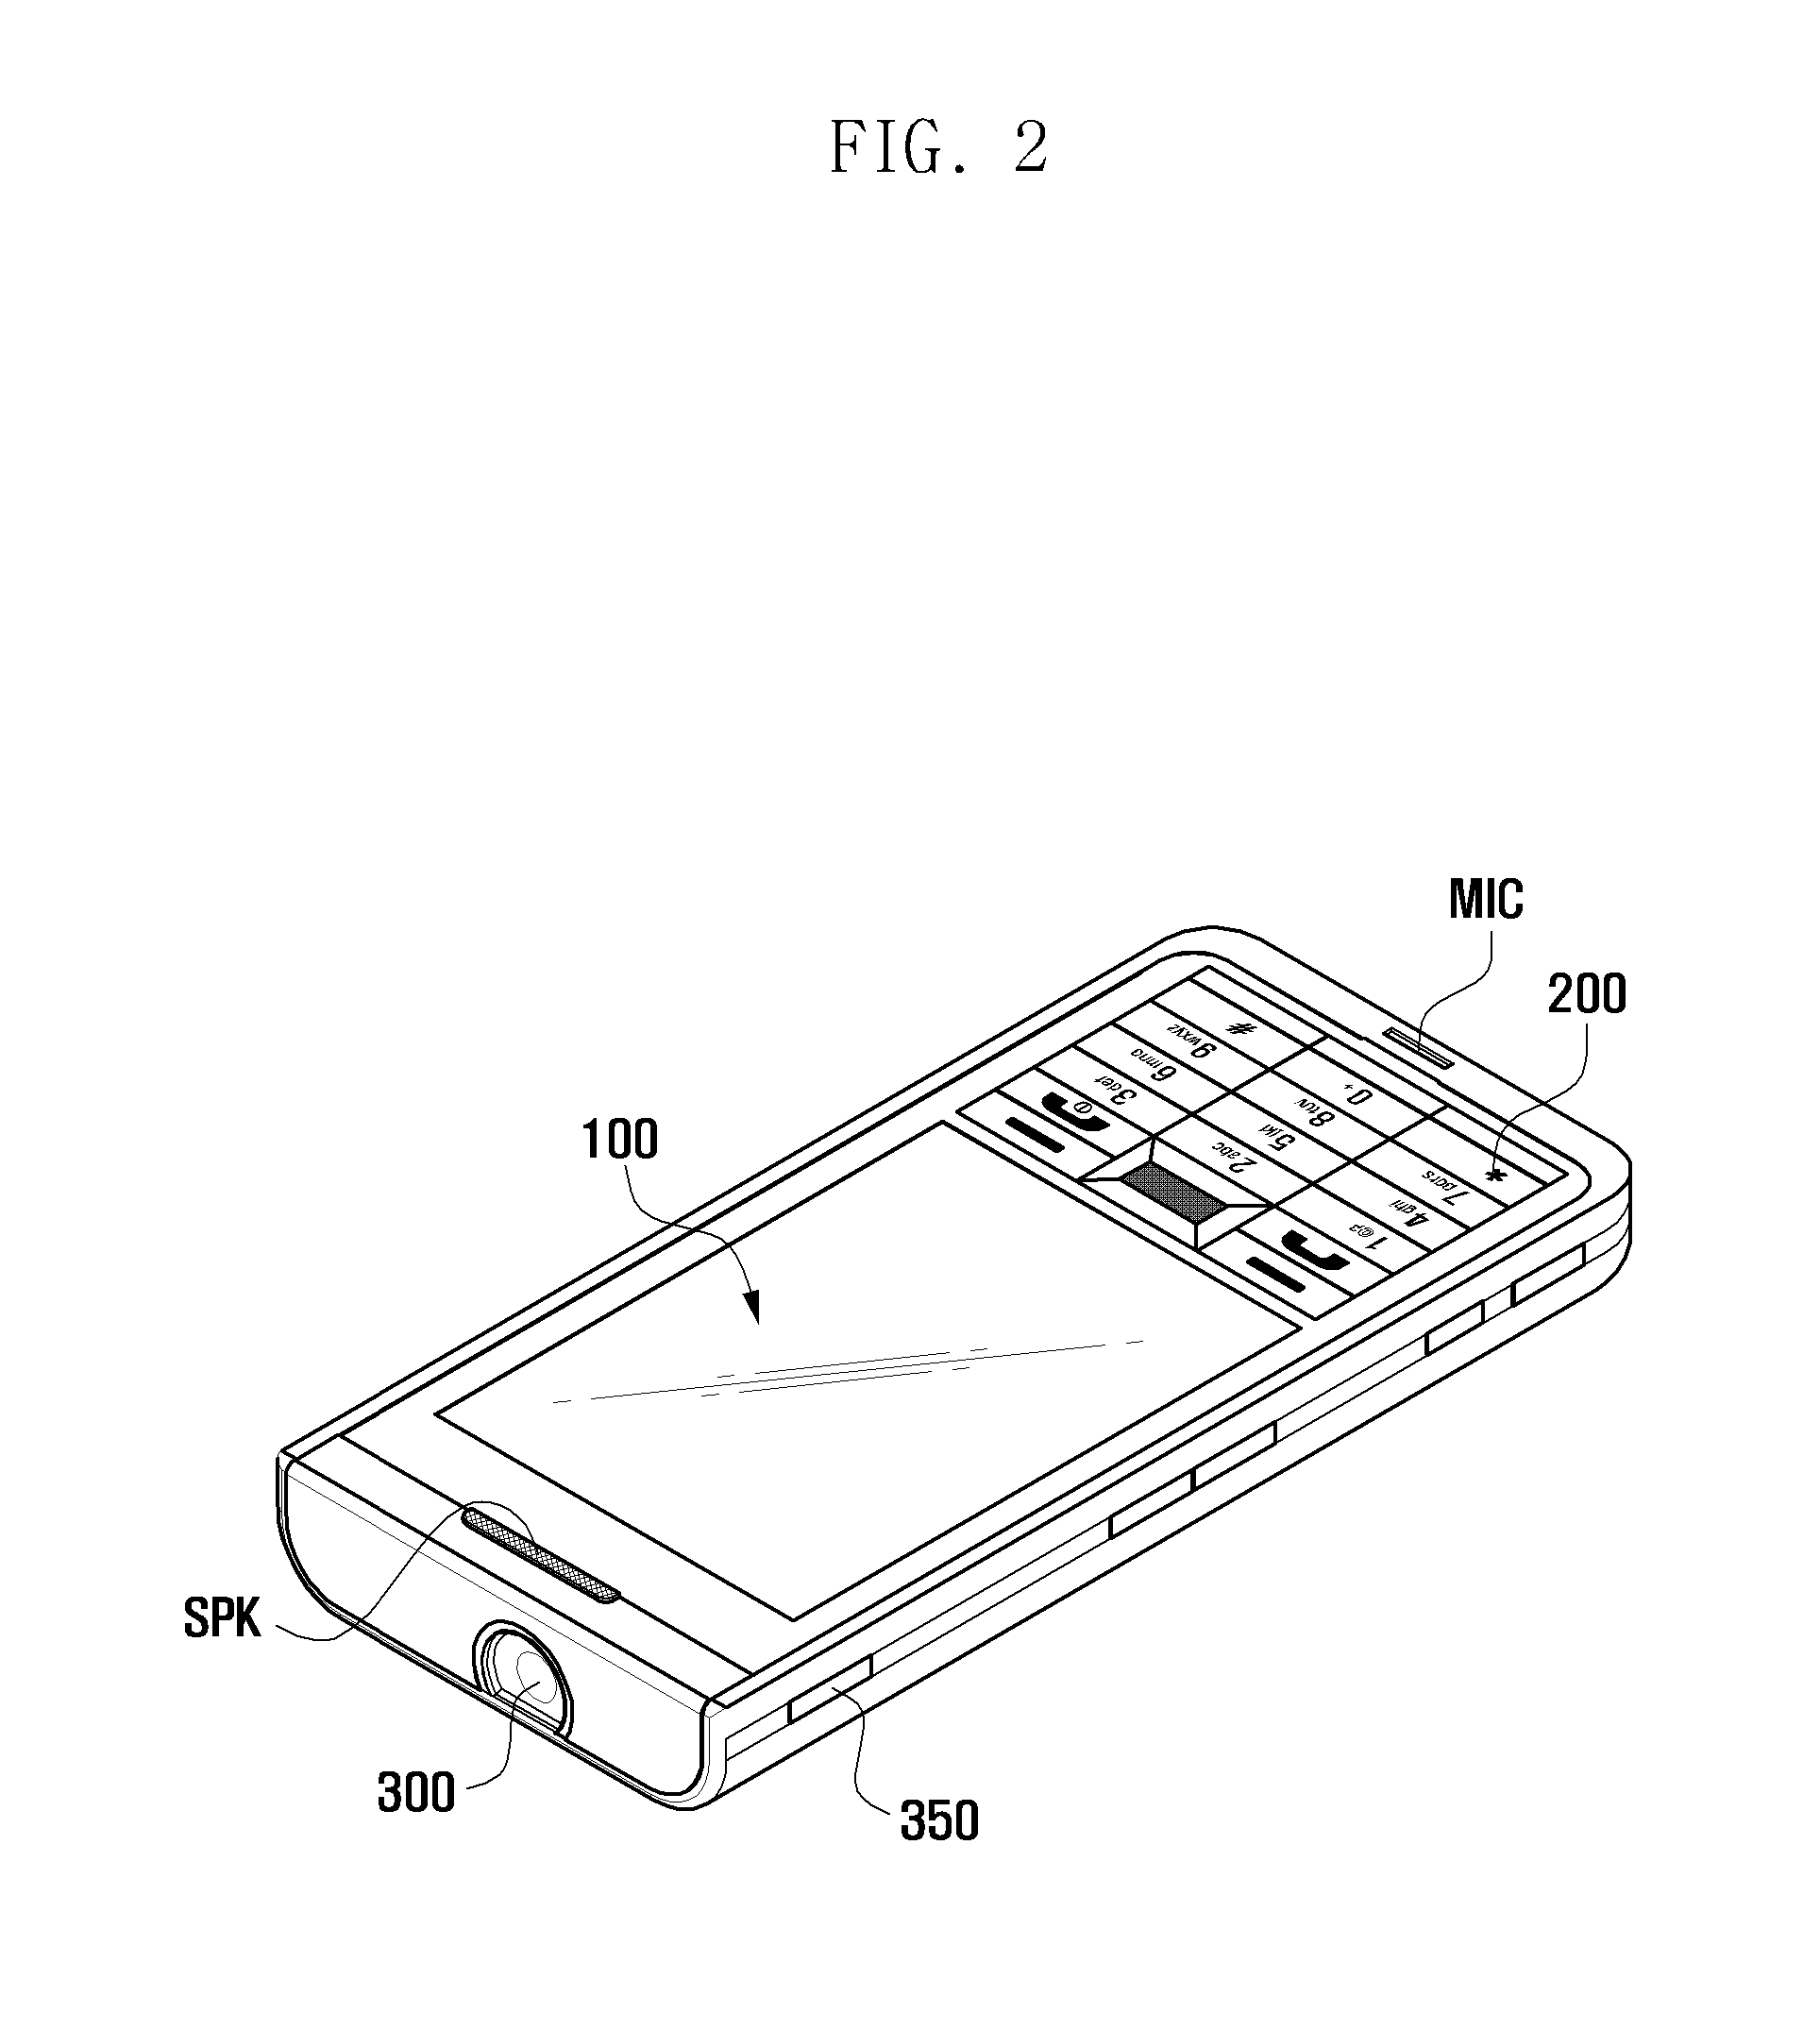 Method and system for controlling external output of a mobile device